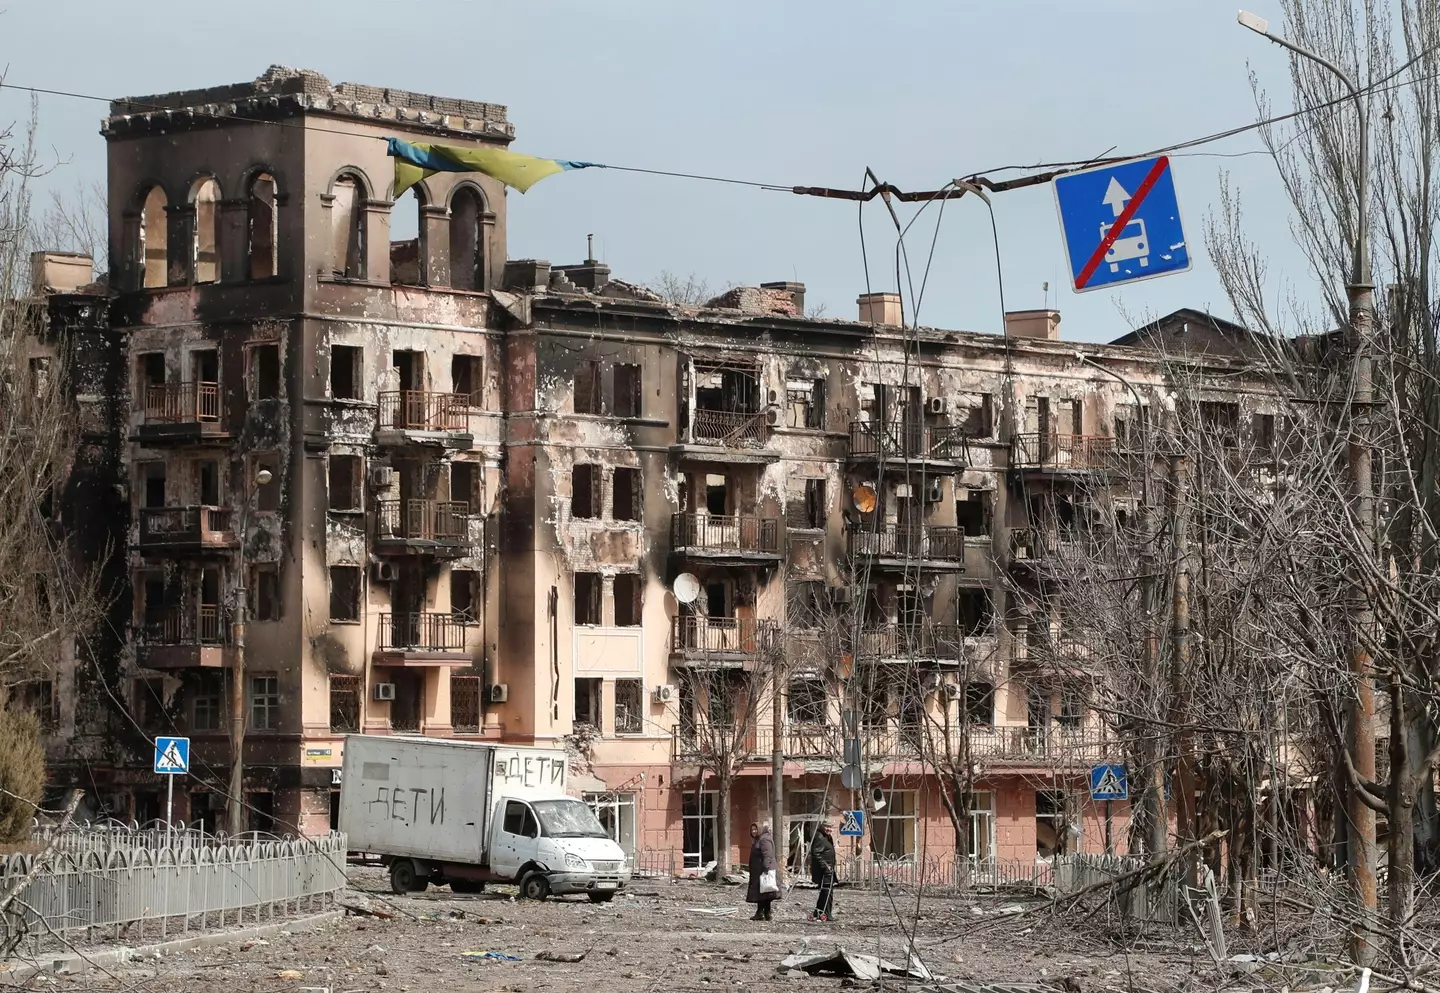 Locals walk along a street next to a building damaged during Ukraine-Russia conflict in the southern port city of Mariupol.